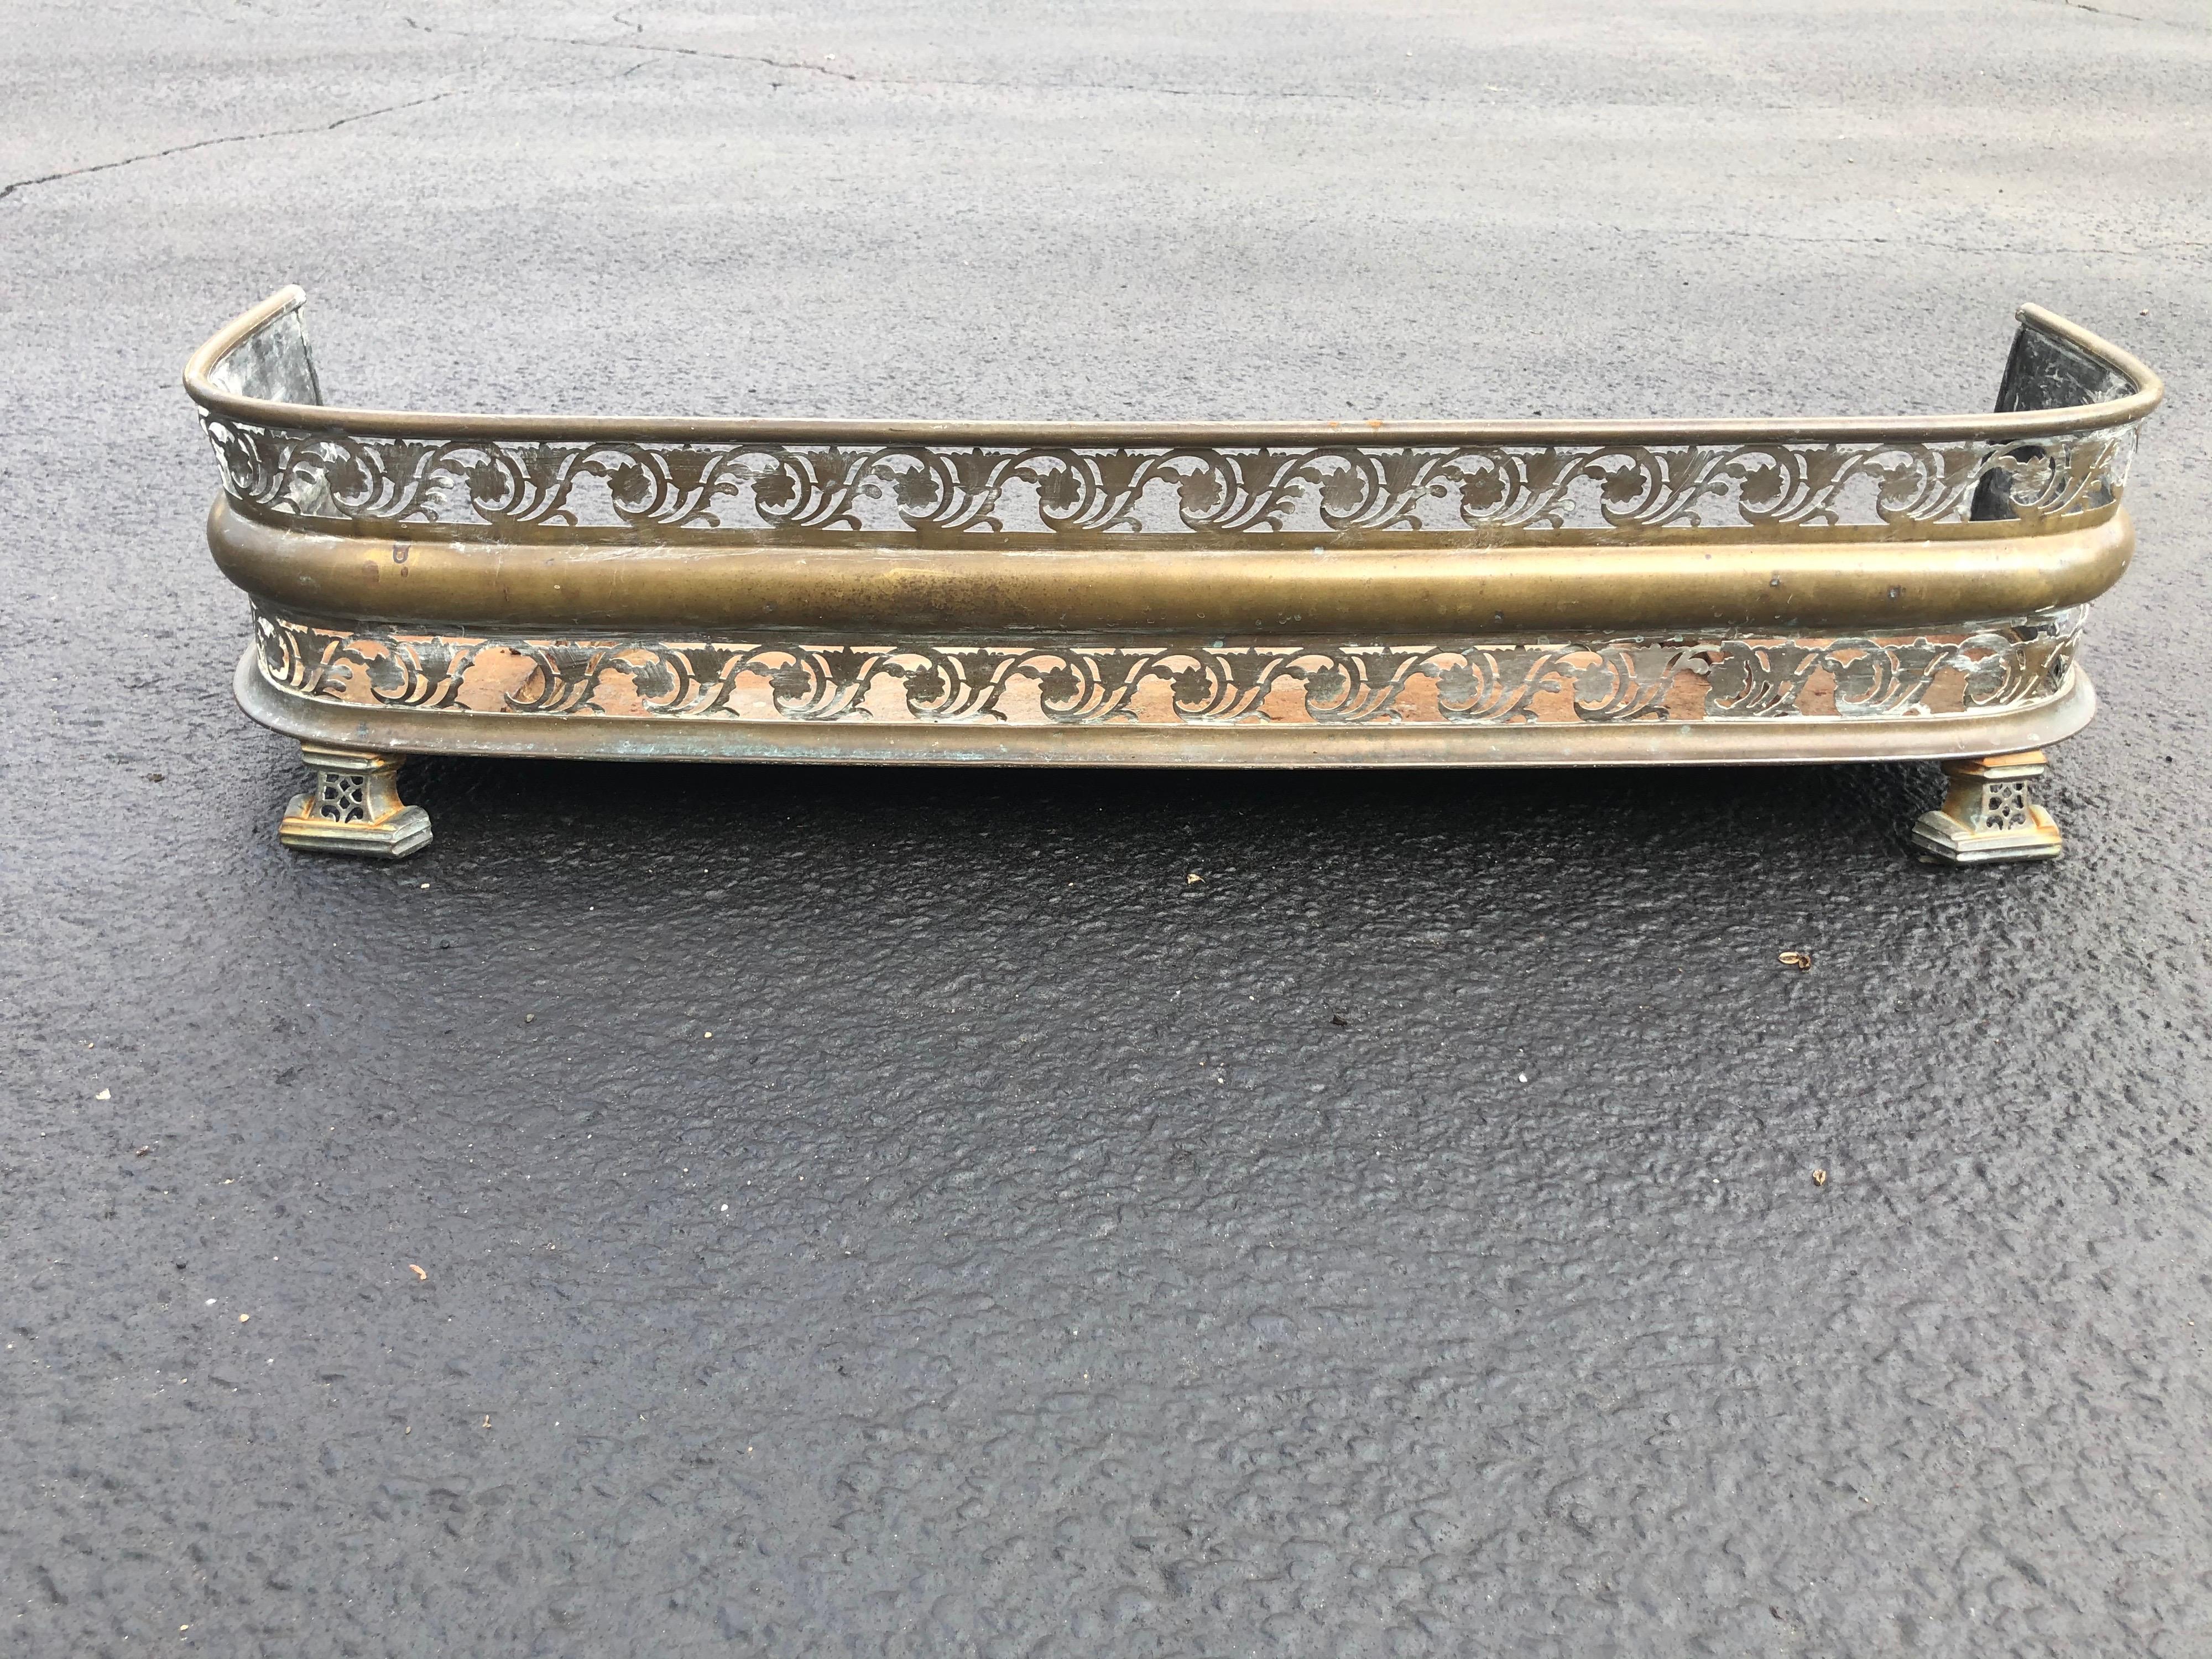 Antique Art Deco brass pierced fireplace fender. Weathered brass finish. Perfect for a deco fireplace. Can parcel ship for an economic rate. 